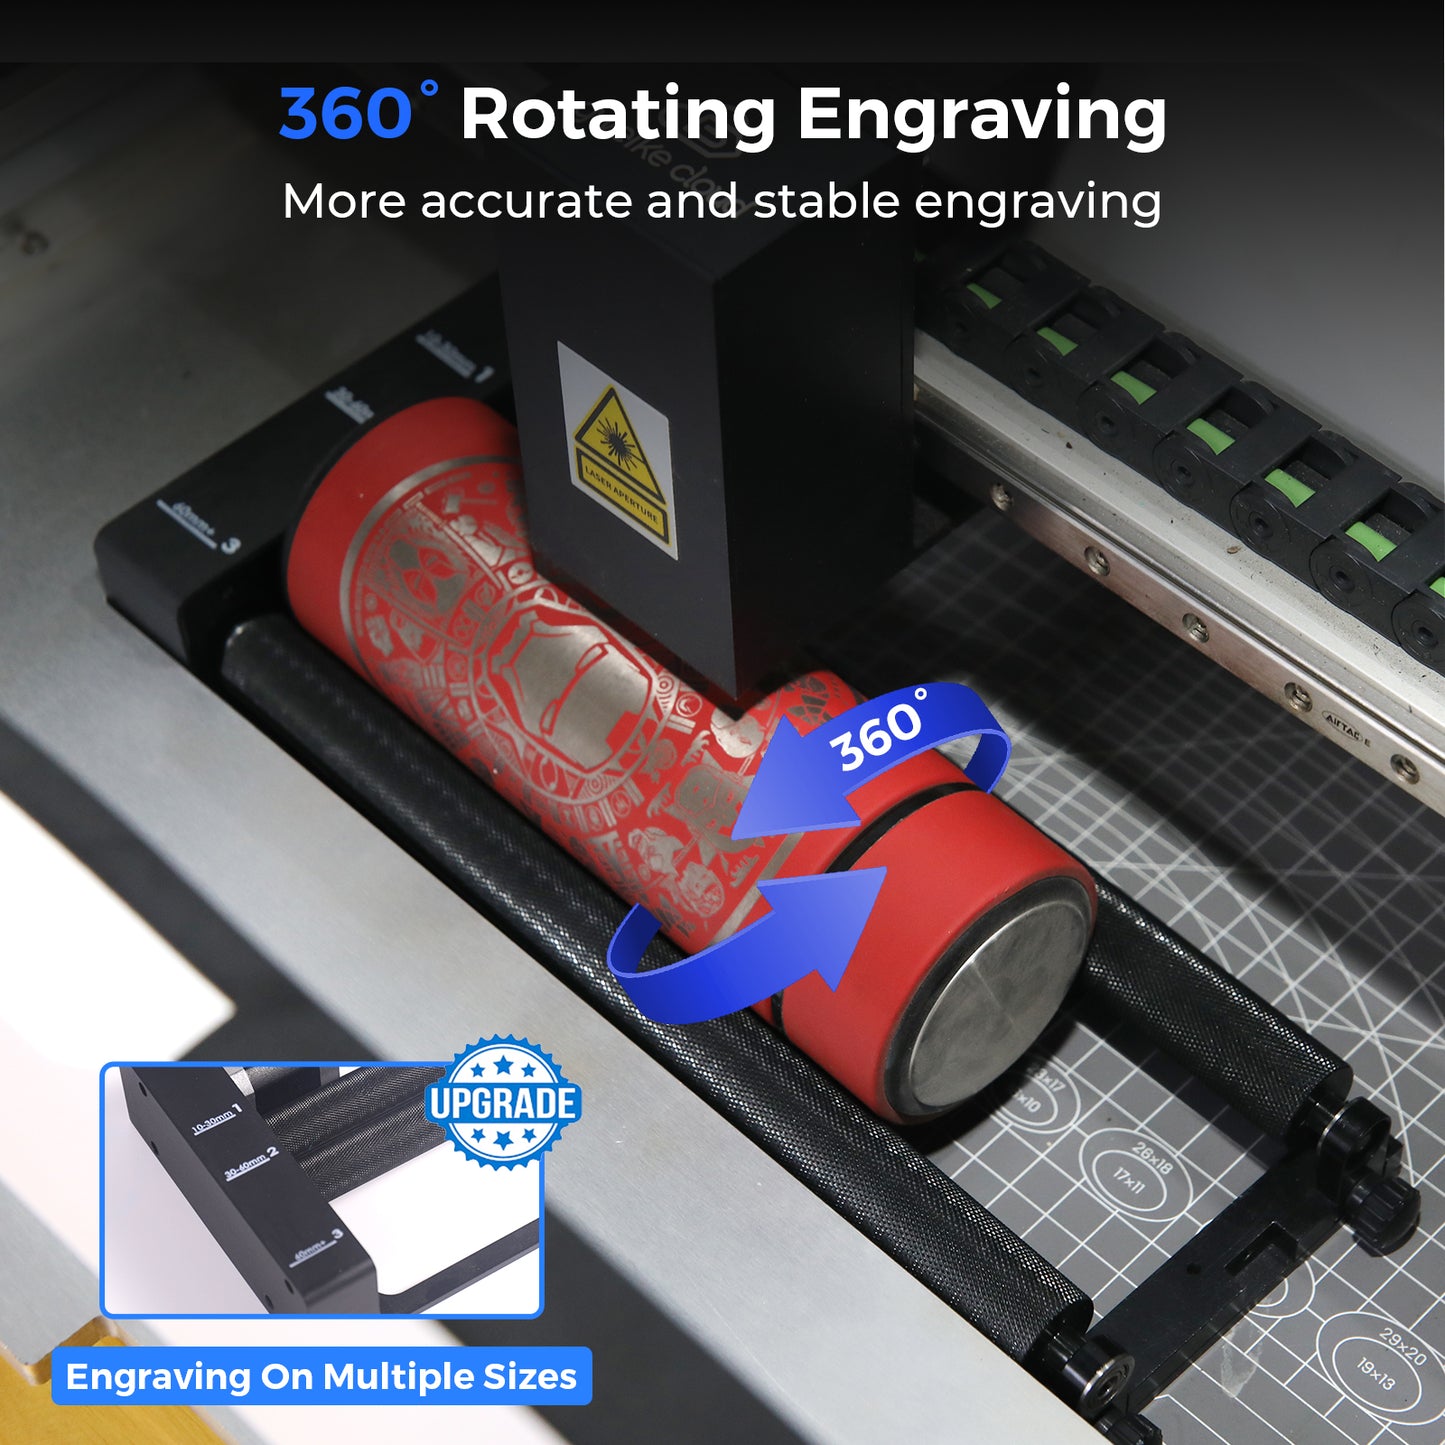 Co2 Laser Rotary Engraver attachment works with Chinese laser